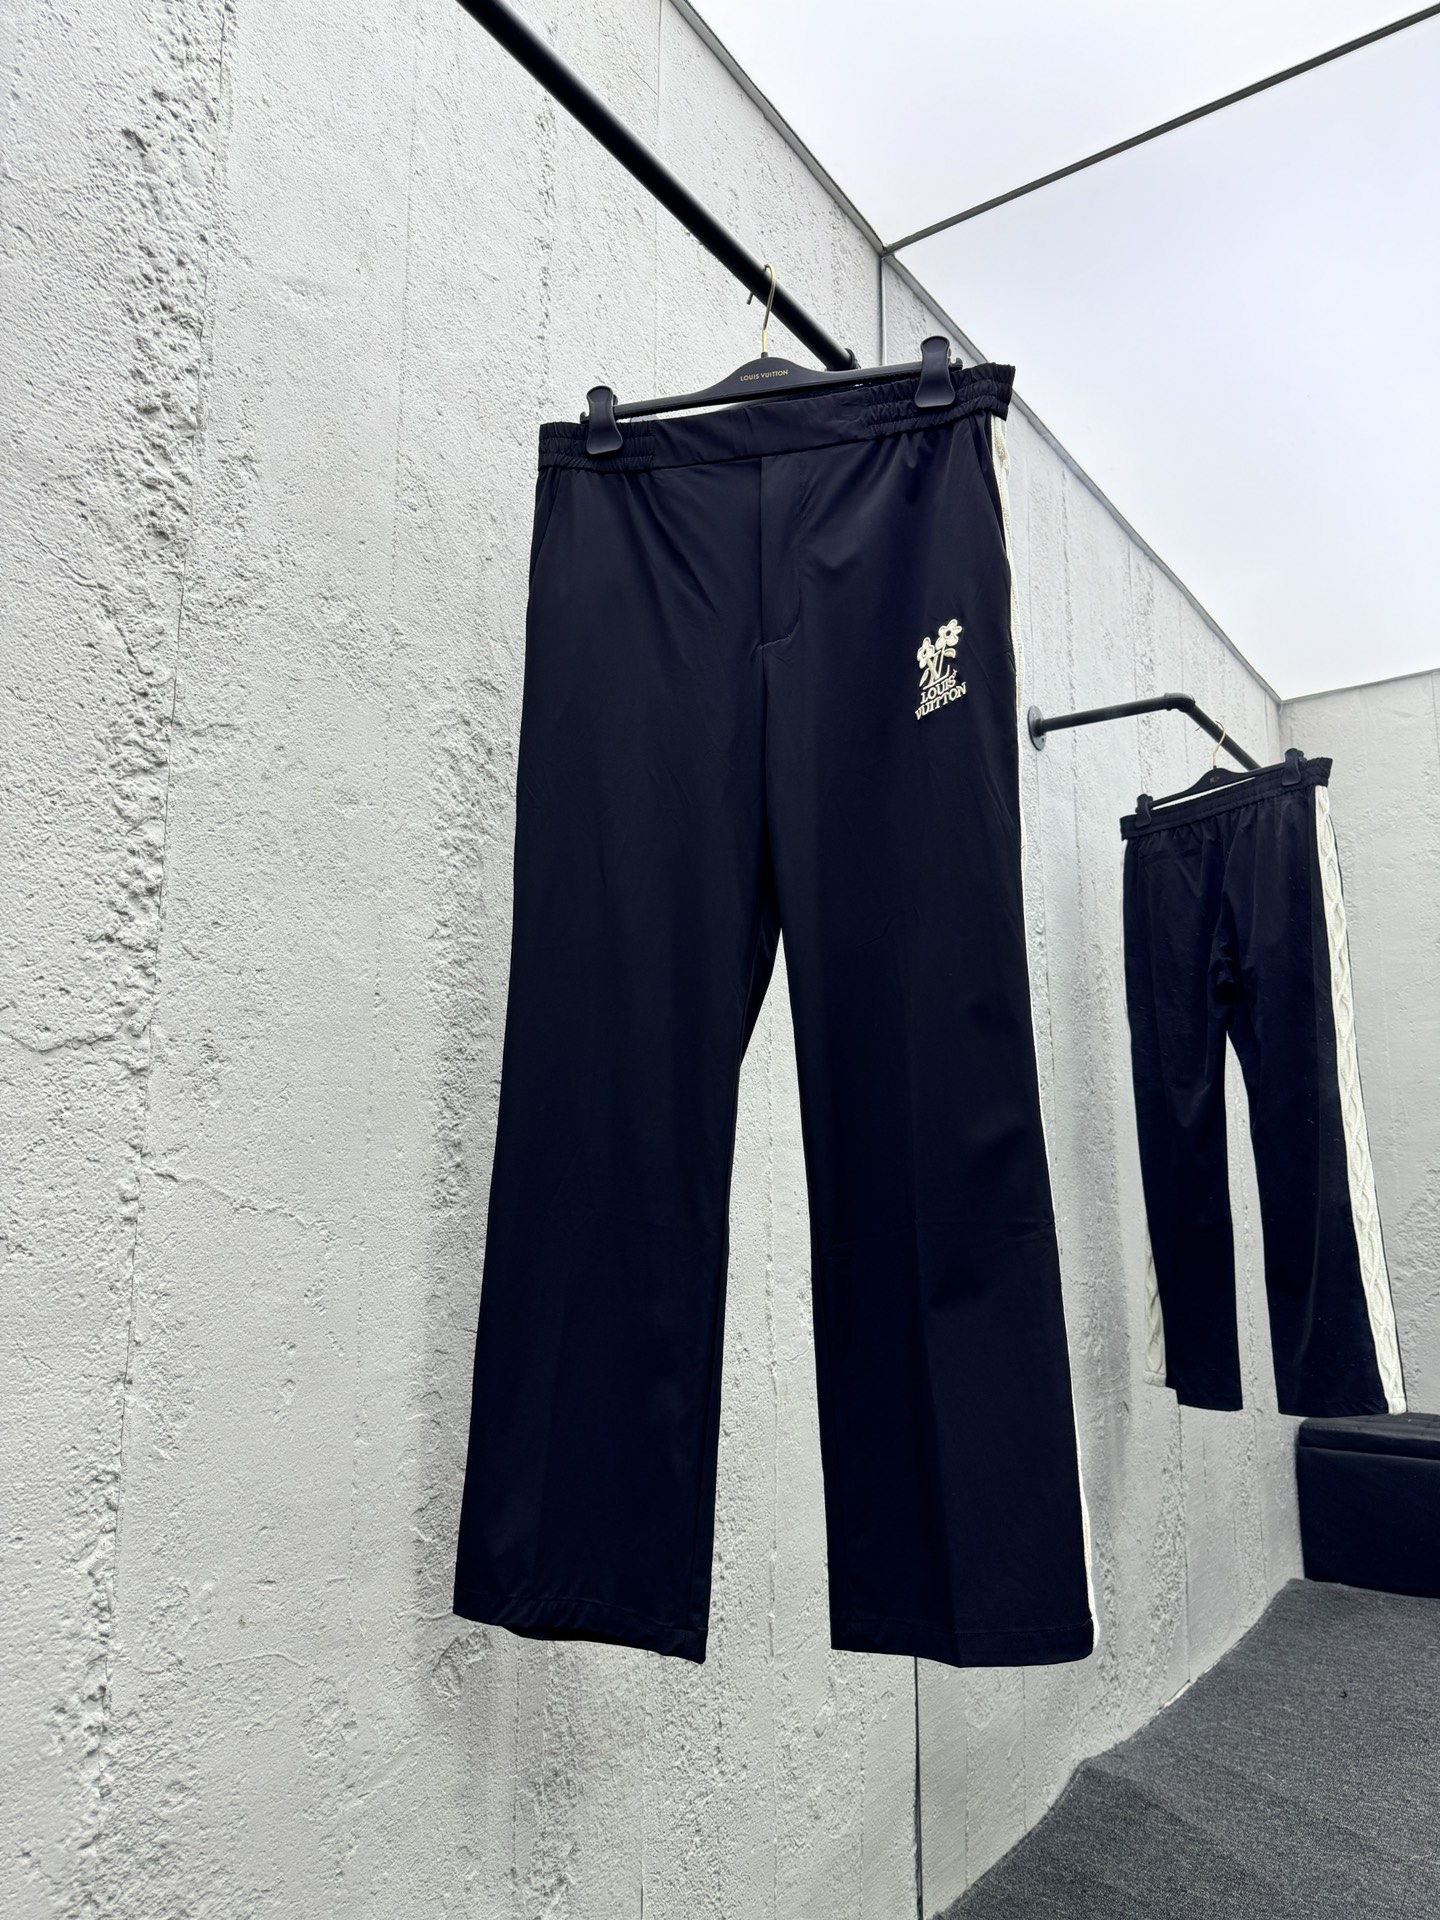 Louis Vuitton Clothing Pants & Trousers Black Embroidery